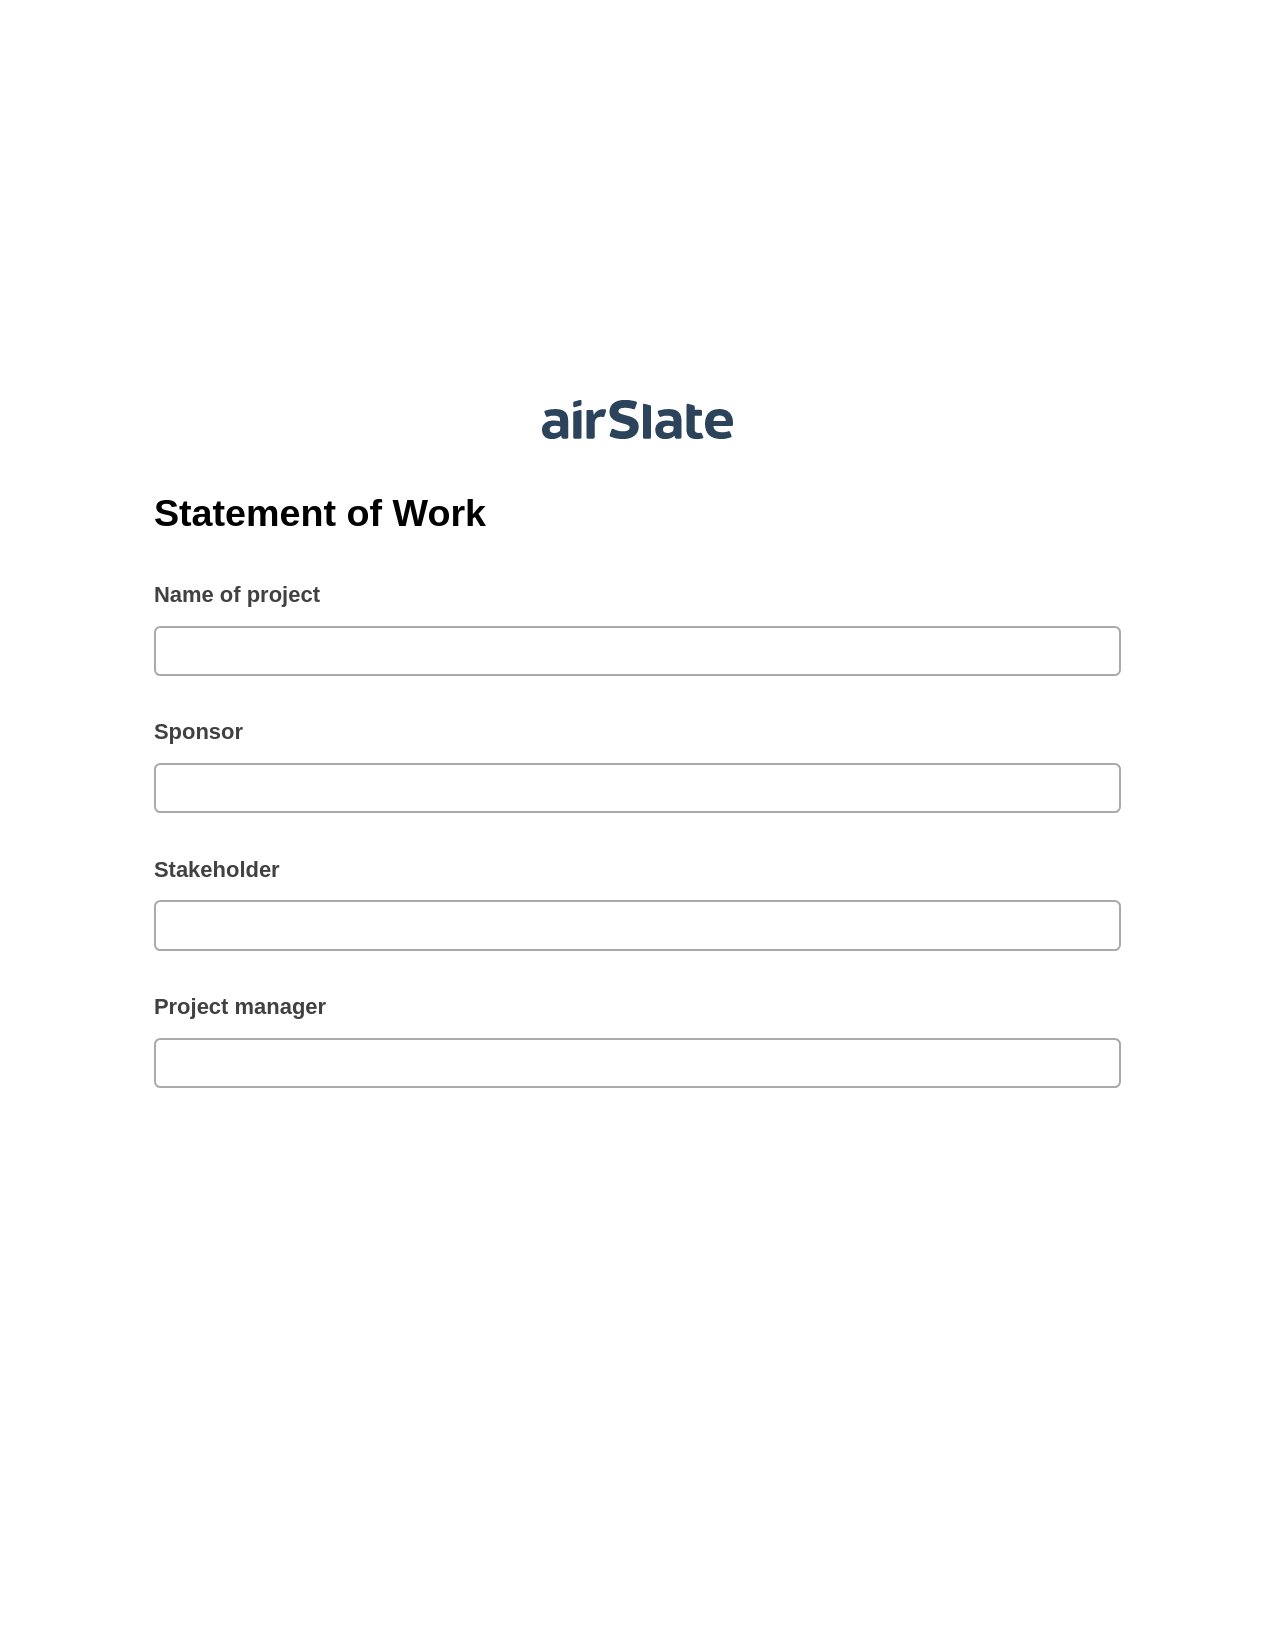 Statement of Work Pre-fill from another Slate Bot, Add Tags to Slate Bot, Archive to SharePoint Folder Bot